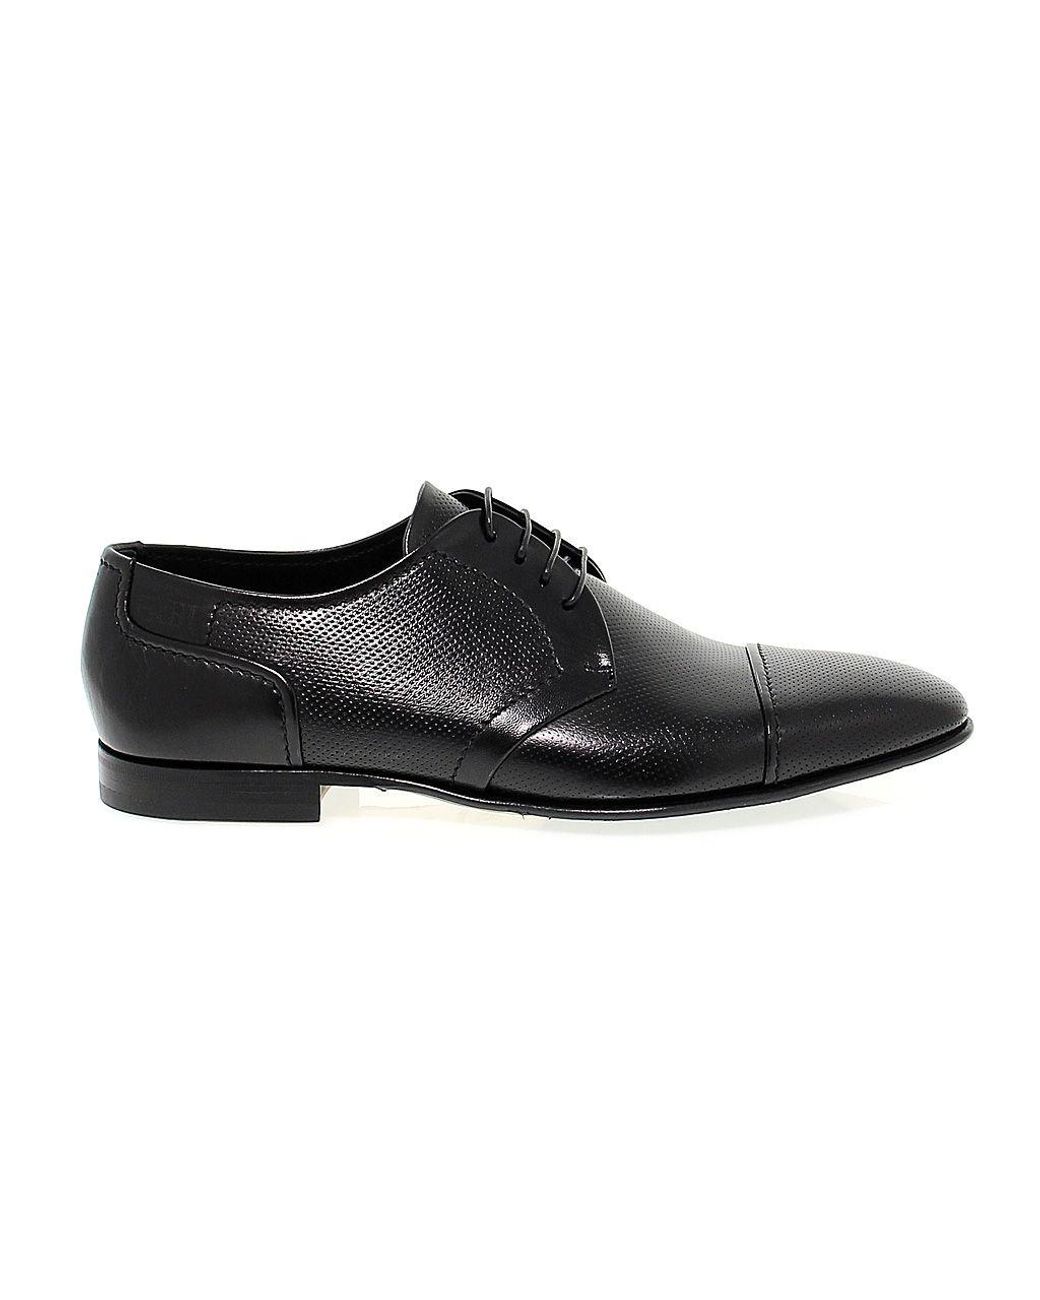 Fabi Black Leather Lace-up Shoes for Men - Lyst